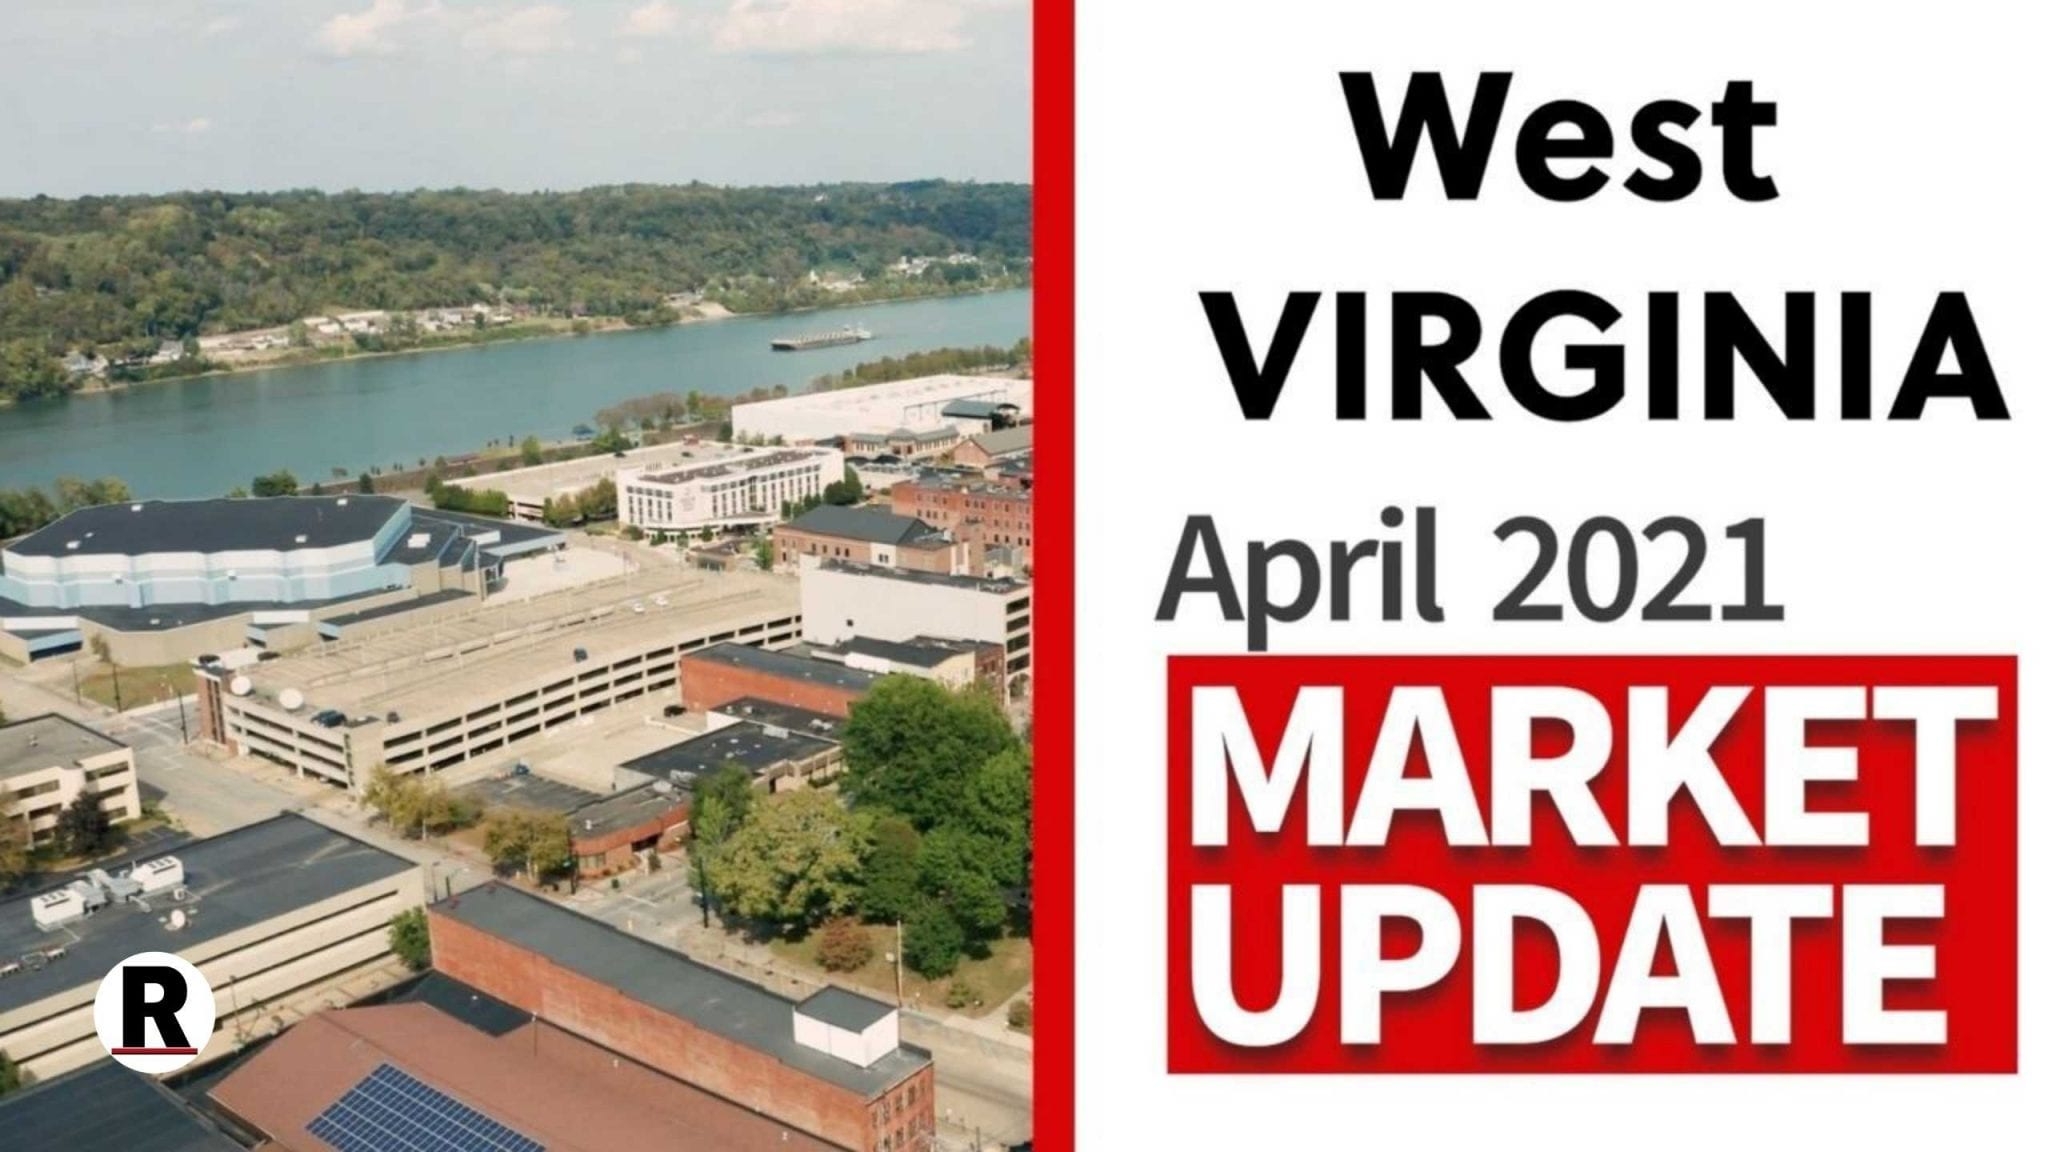 Keep your Eyes Peeled on West Virginia’s Real Estate Market!